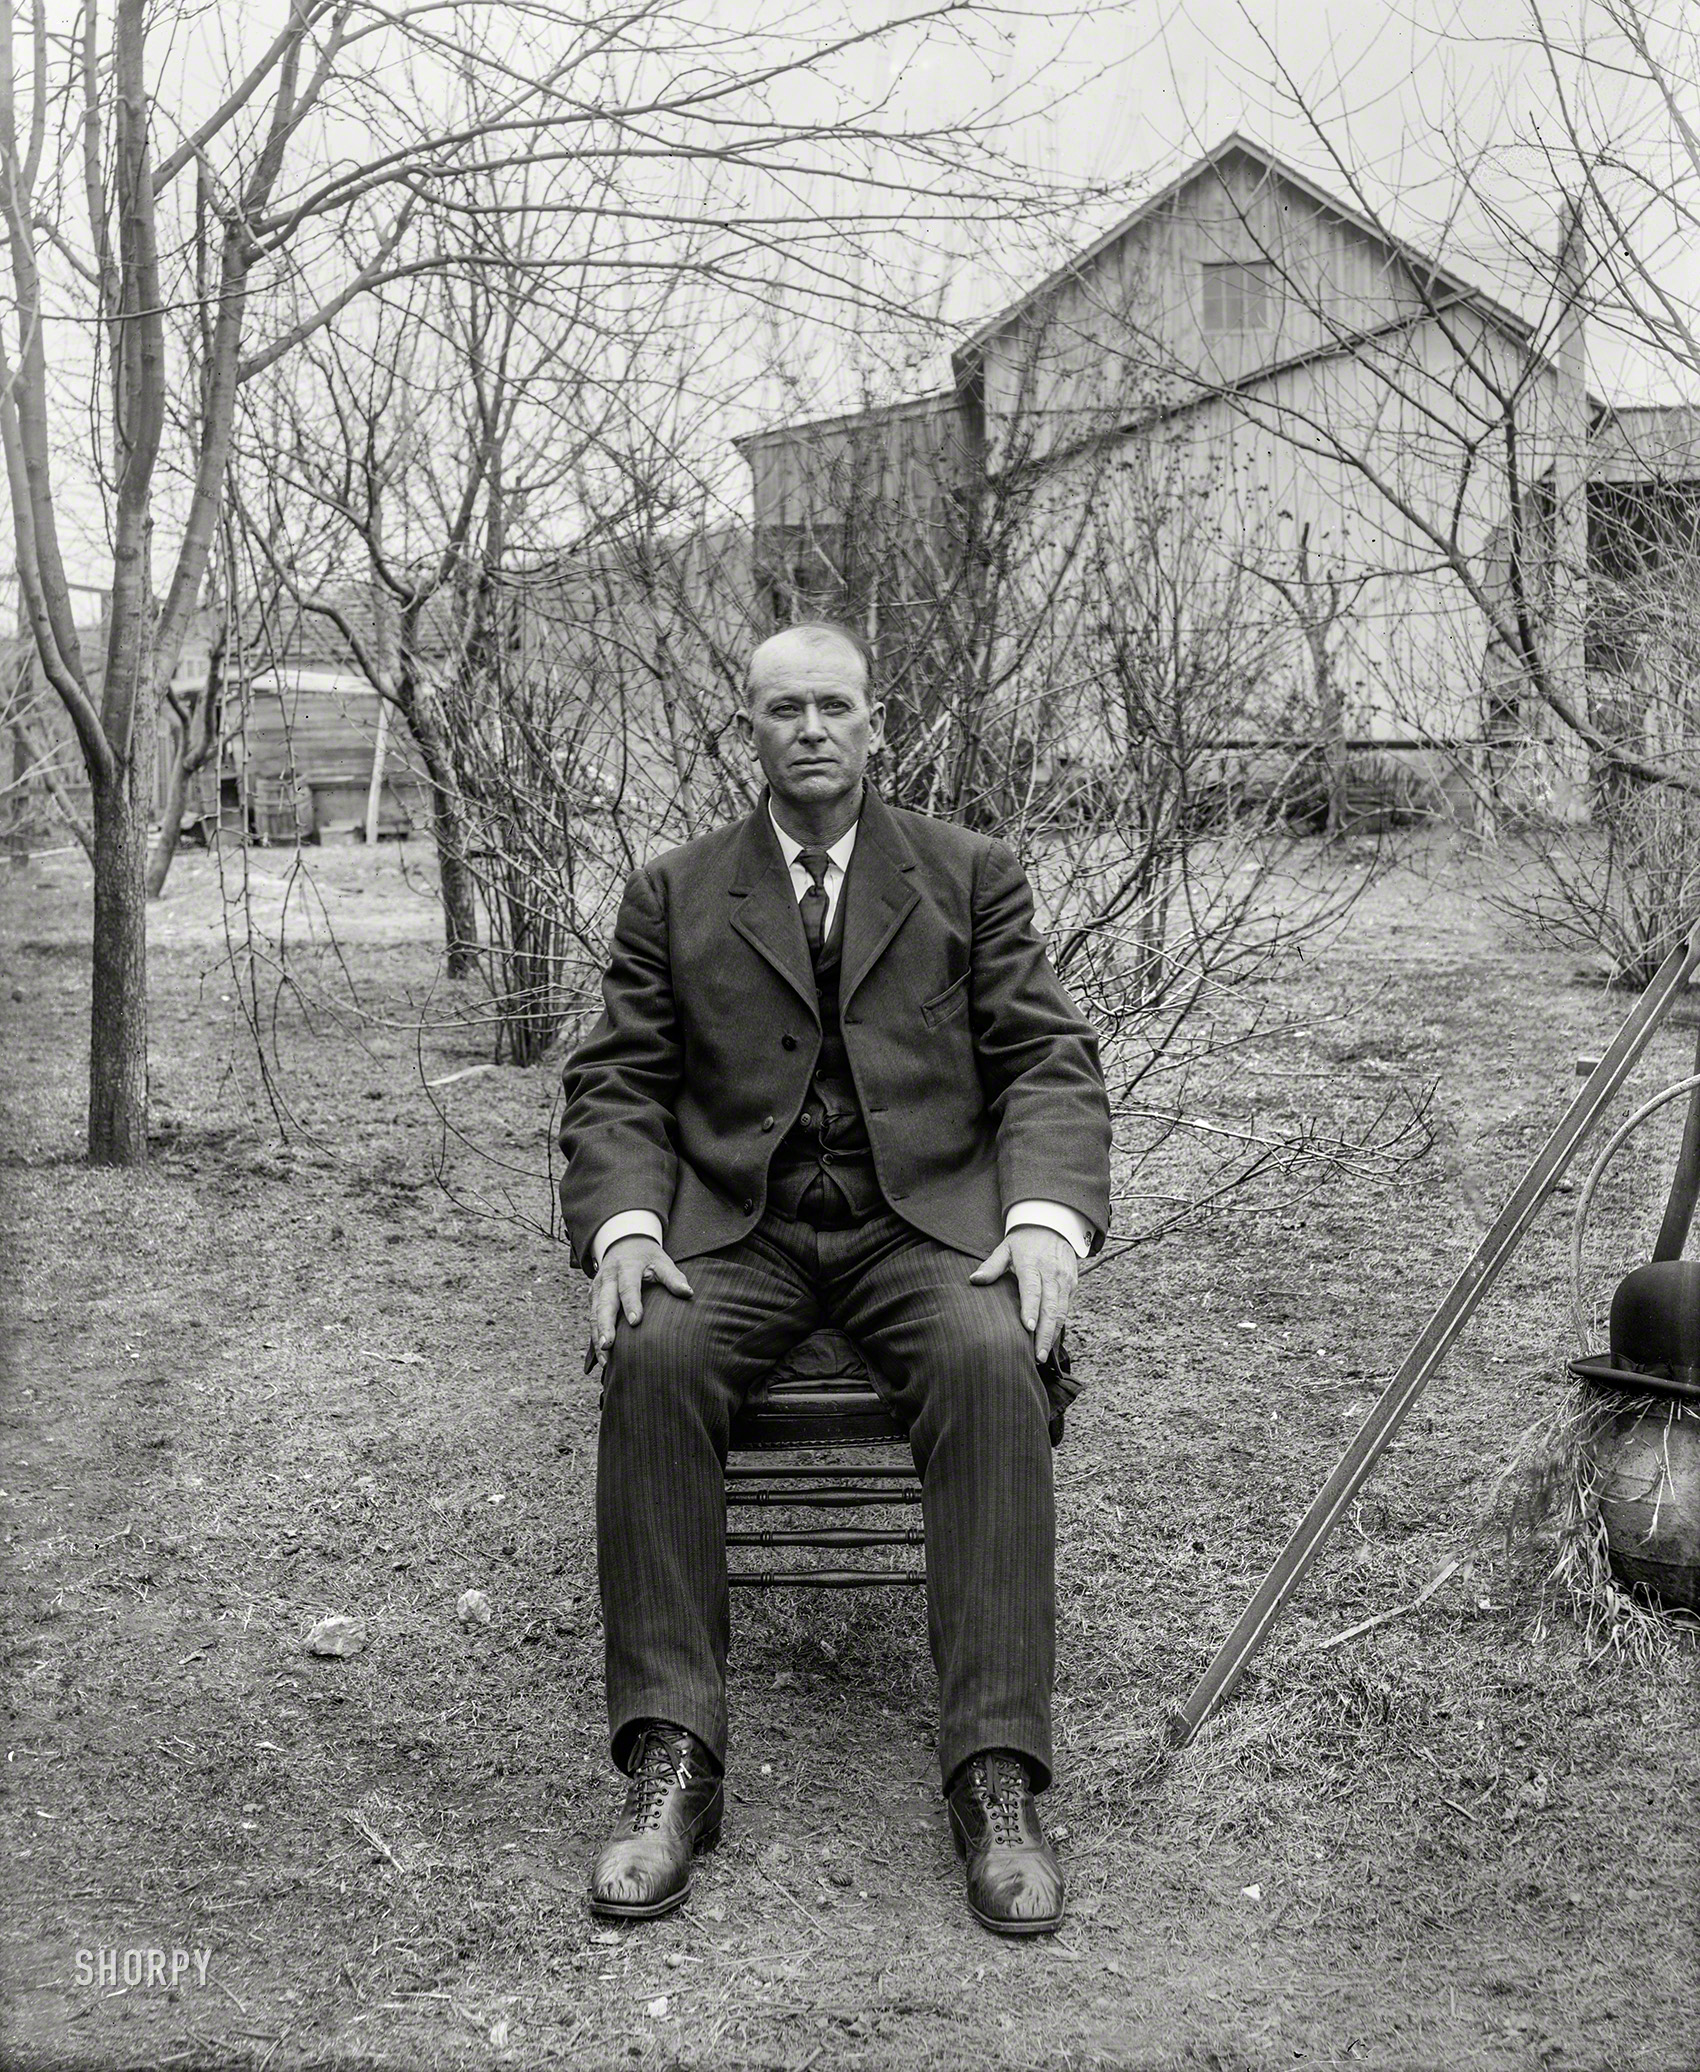 Vienna, Virginia, circa 1920. "H.A. Money." The undertaker Howard A. Money (1859-1931). National Photo Company Collection glass negative. View full size.